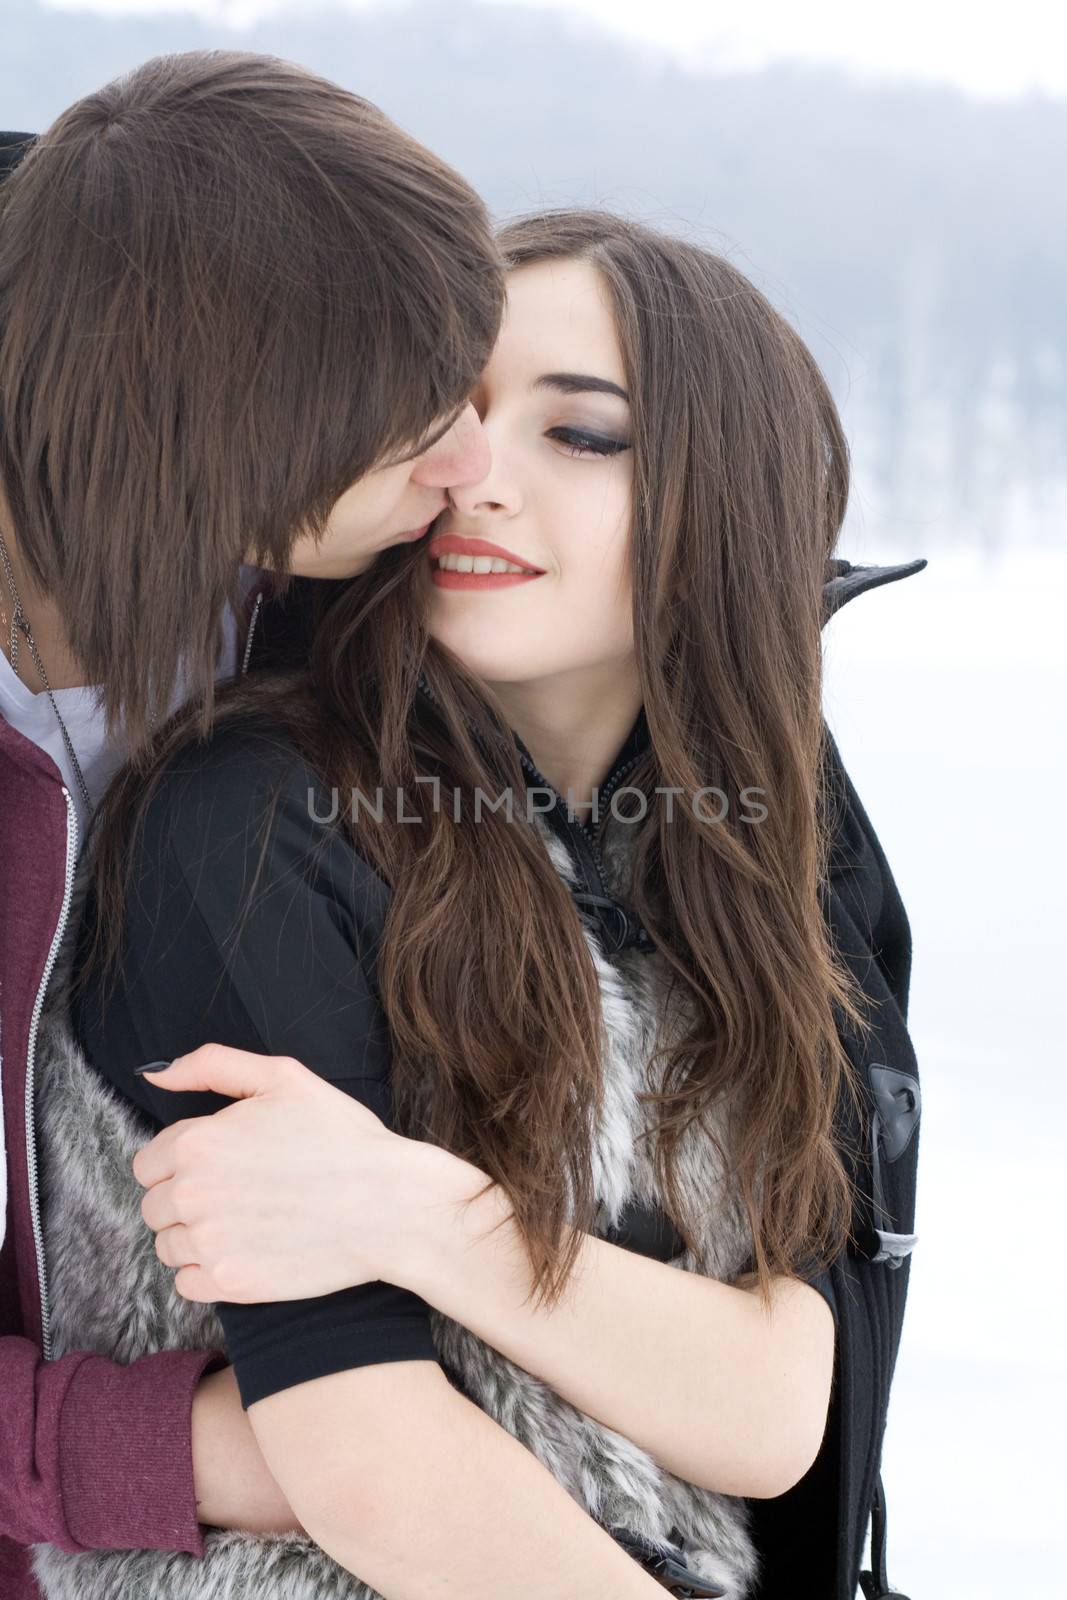  Romantic young couple kissing  by Irina1977